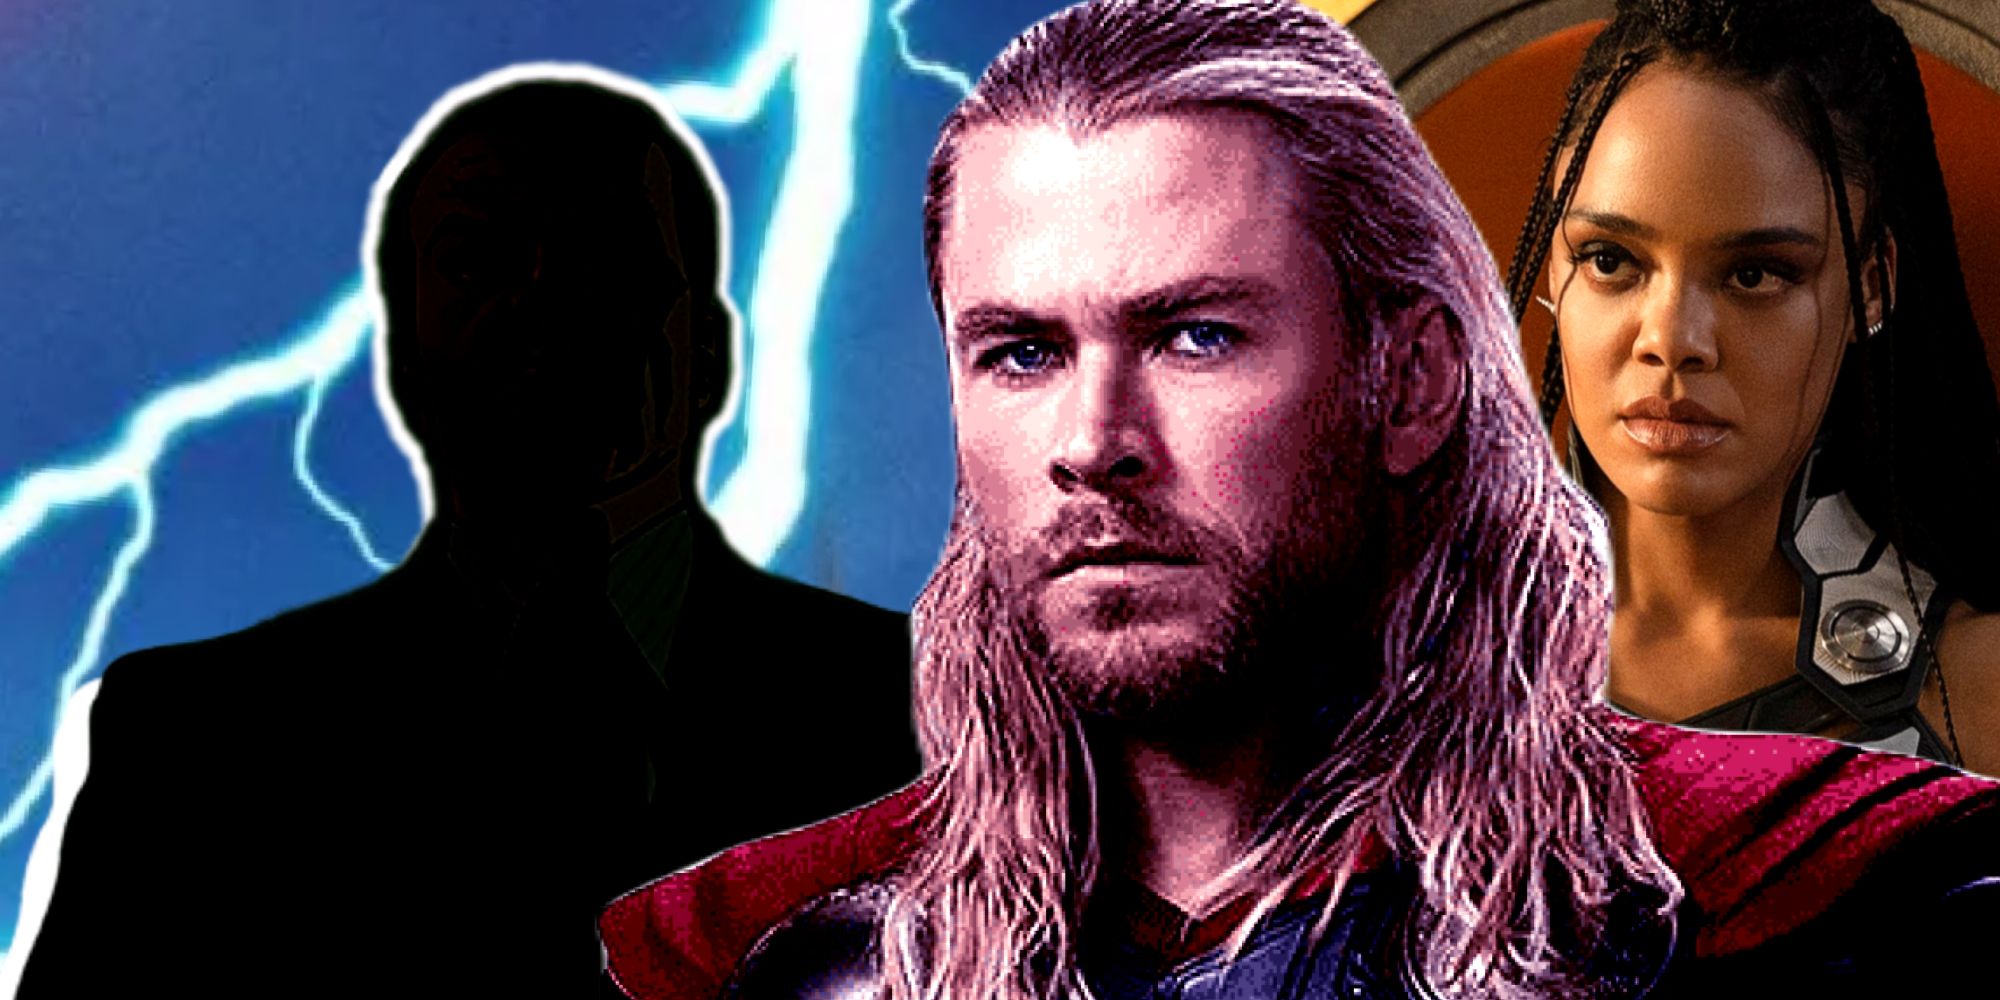 MCU Thor and Valkyrie with a Mysterious Marvel Villain Silhouette